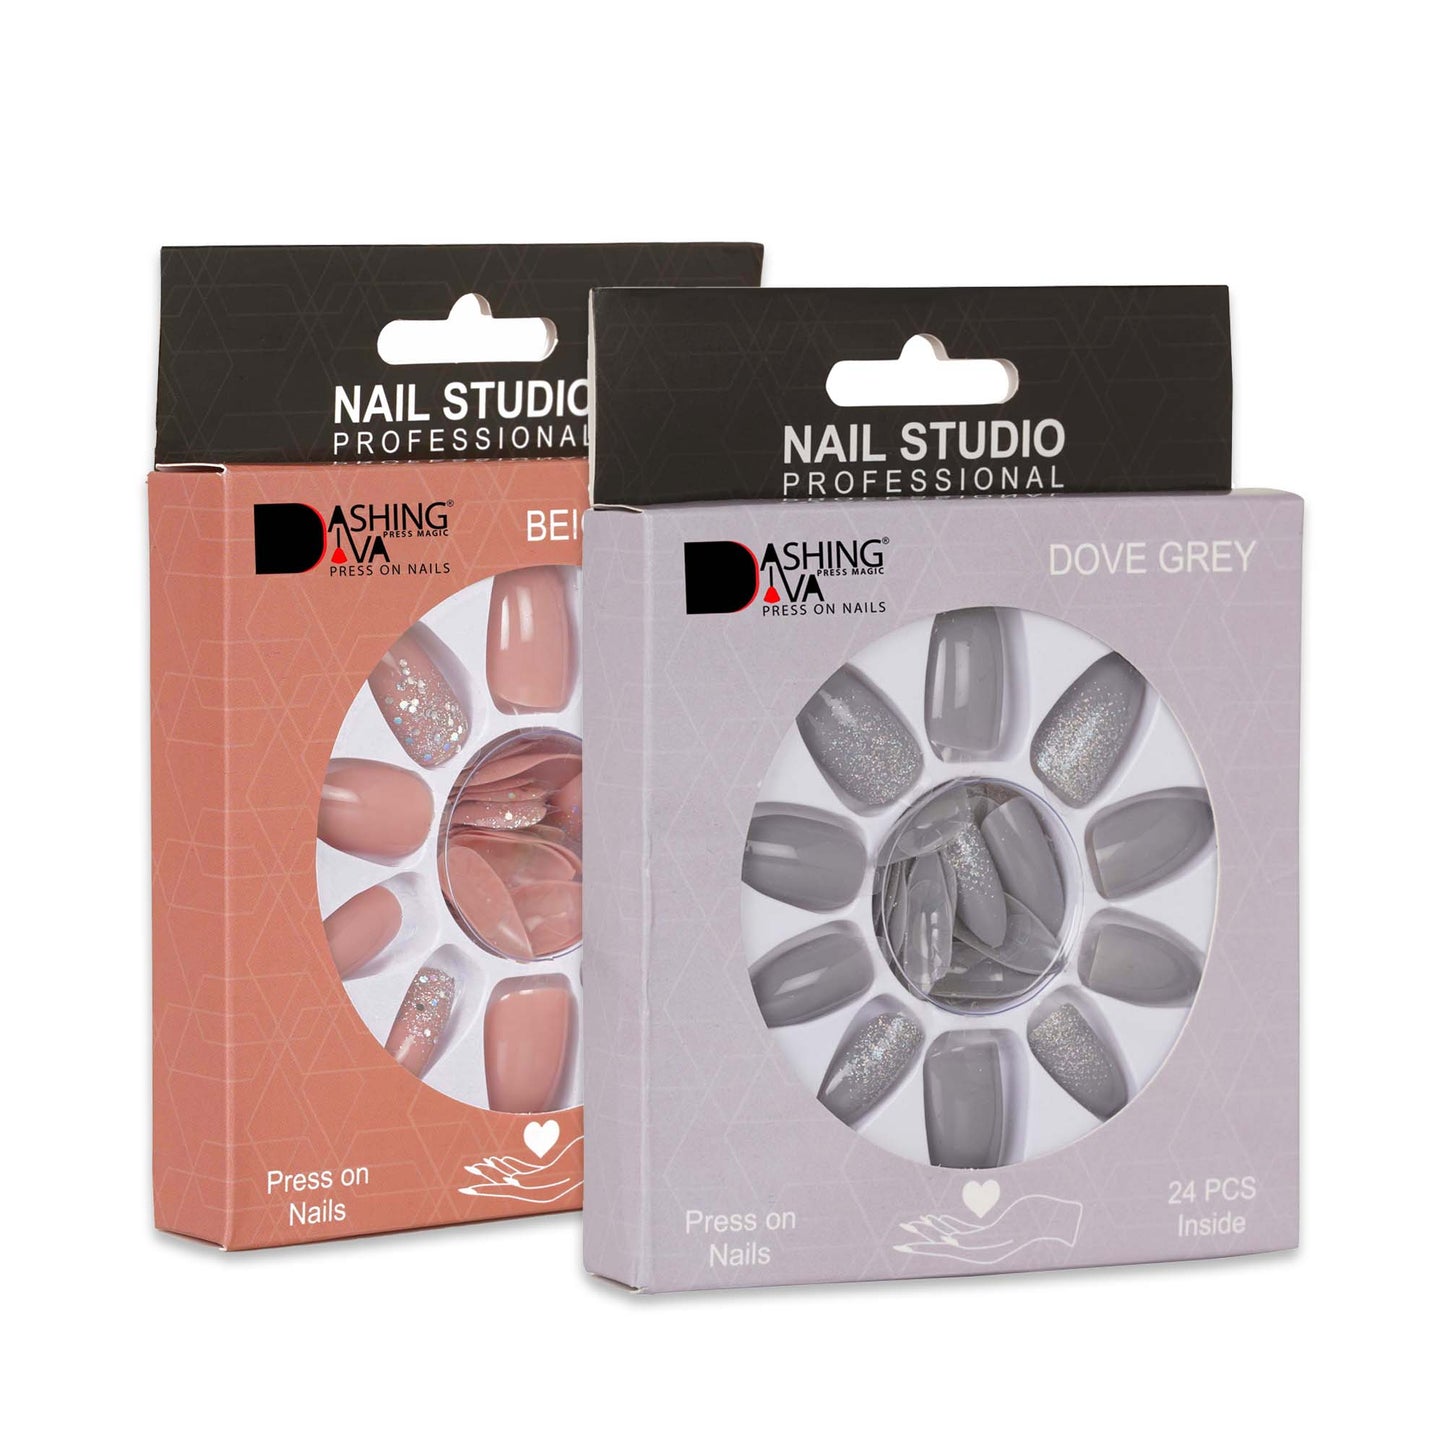 Stick On Nails | Dashing Diva Press Magic Beige Sparkles, Dove Grey Artificial Reusable False Acrylic Press on Nails With Quick Dry Nail Glue, Pack of 2